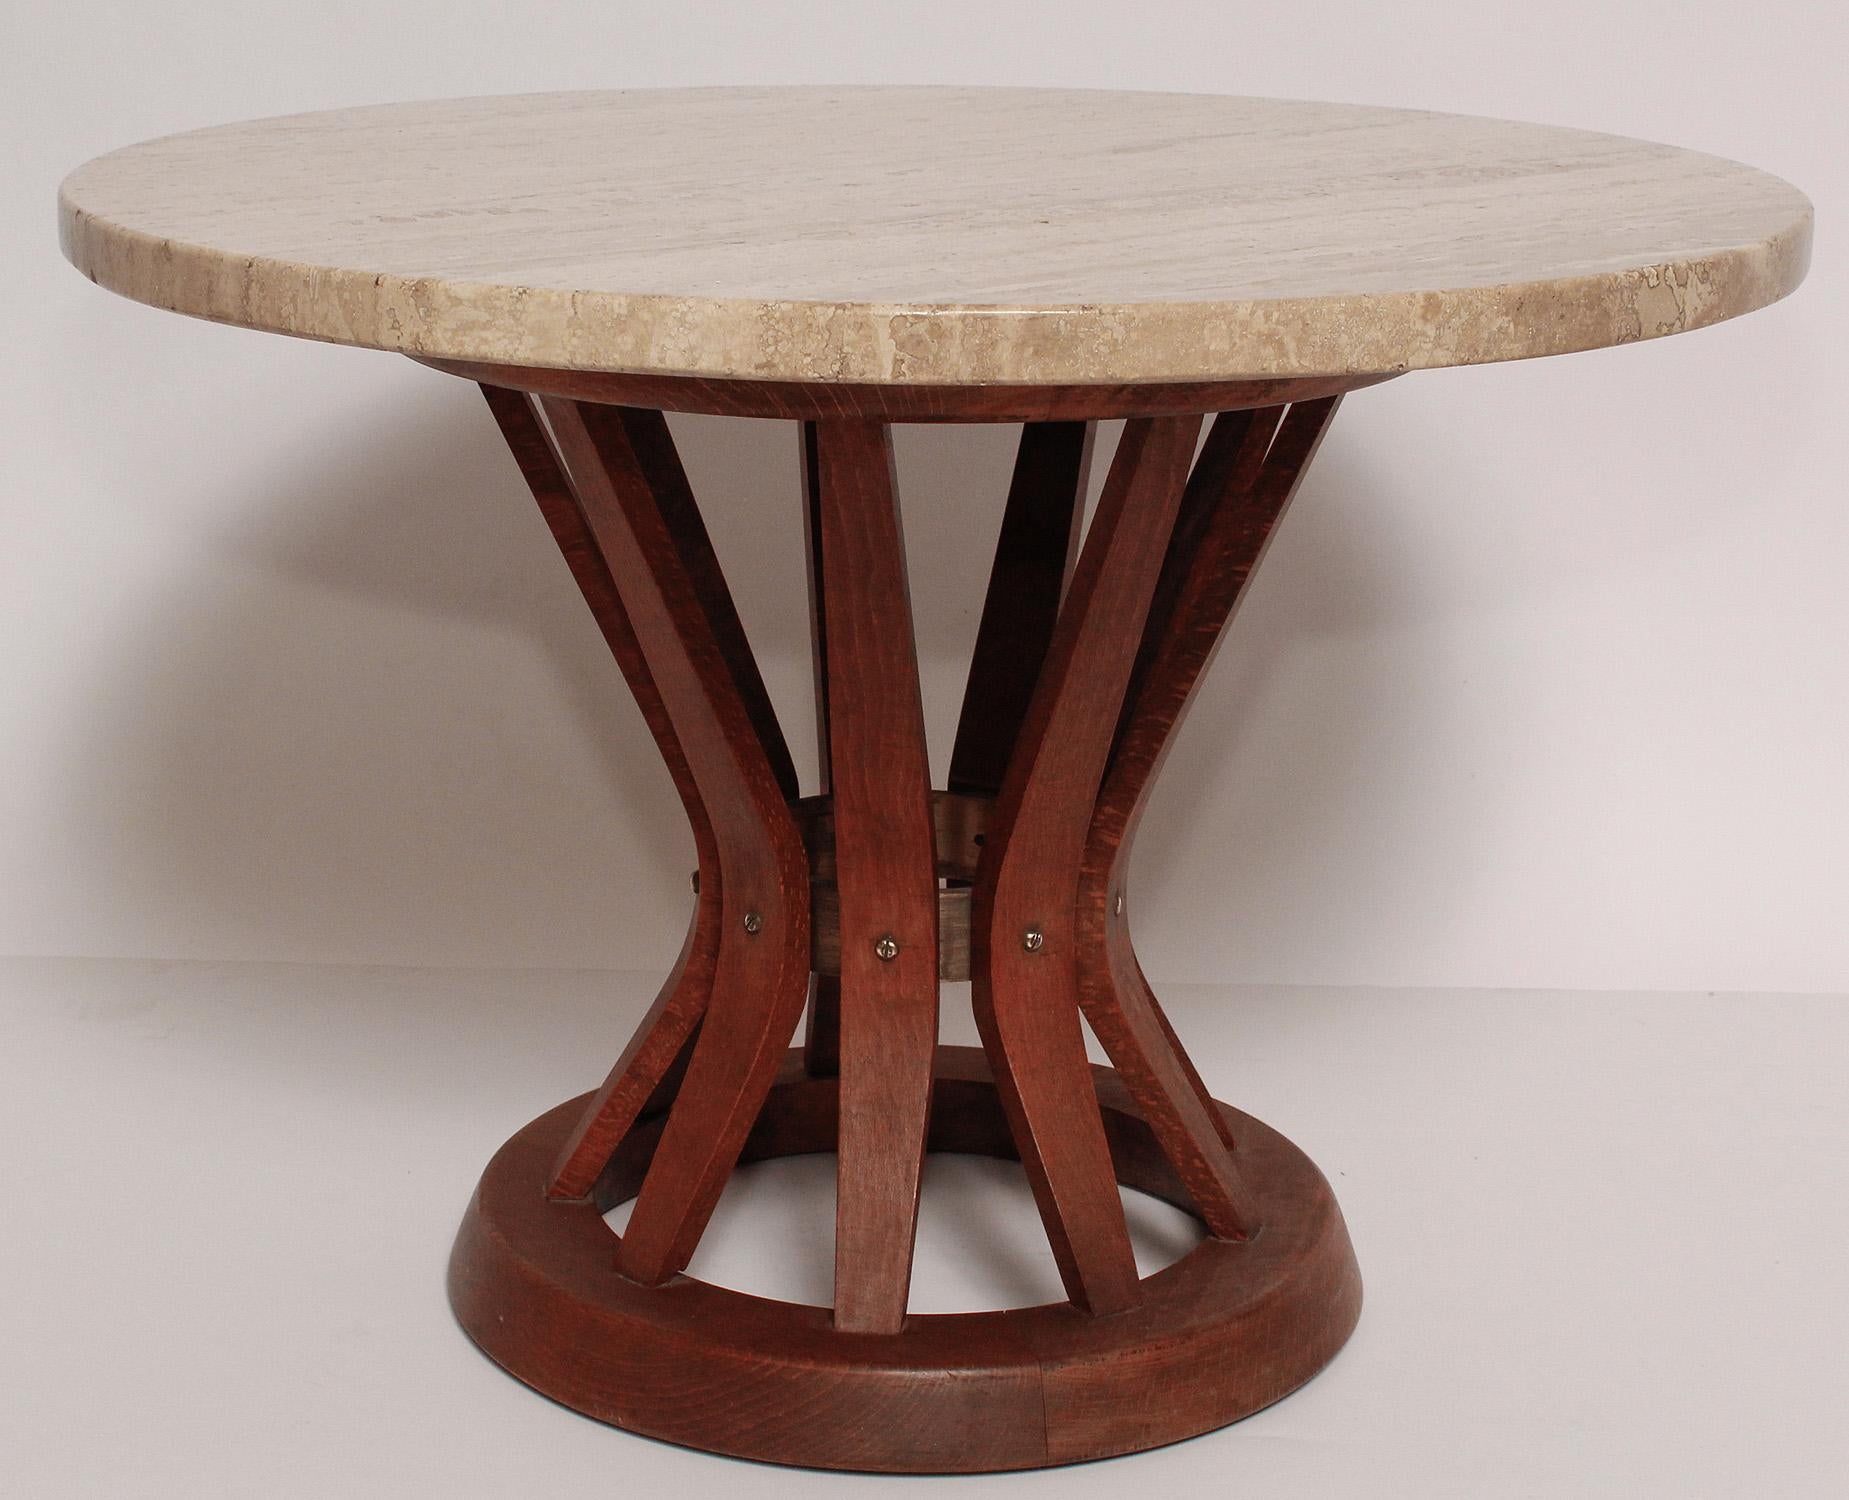 Perfect little side or drinks table with a cream color marble top and a rich oak wood base by Edward Wormley for Dunbar.
The right touch of any midcentury interior.